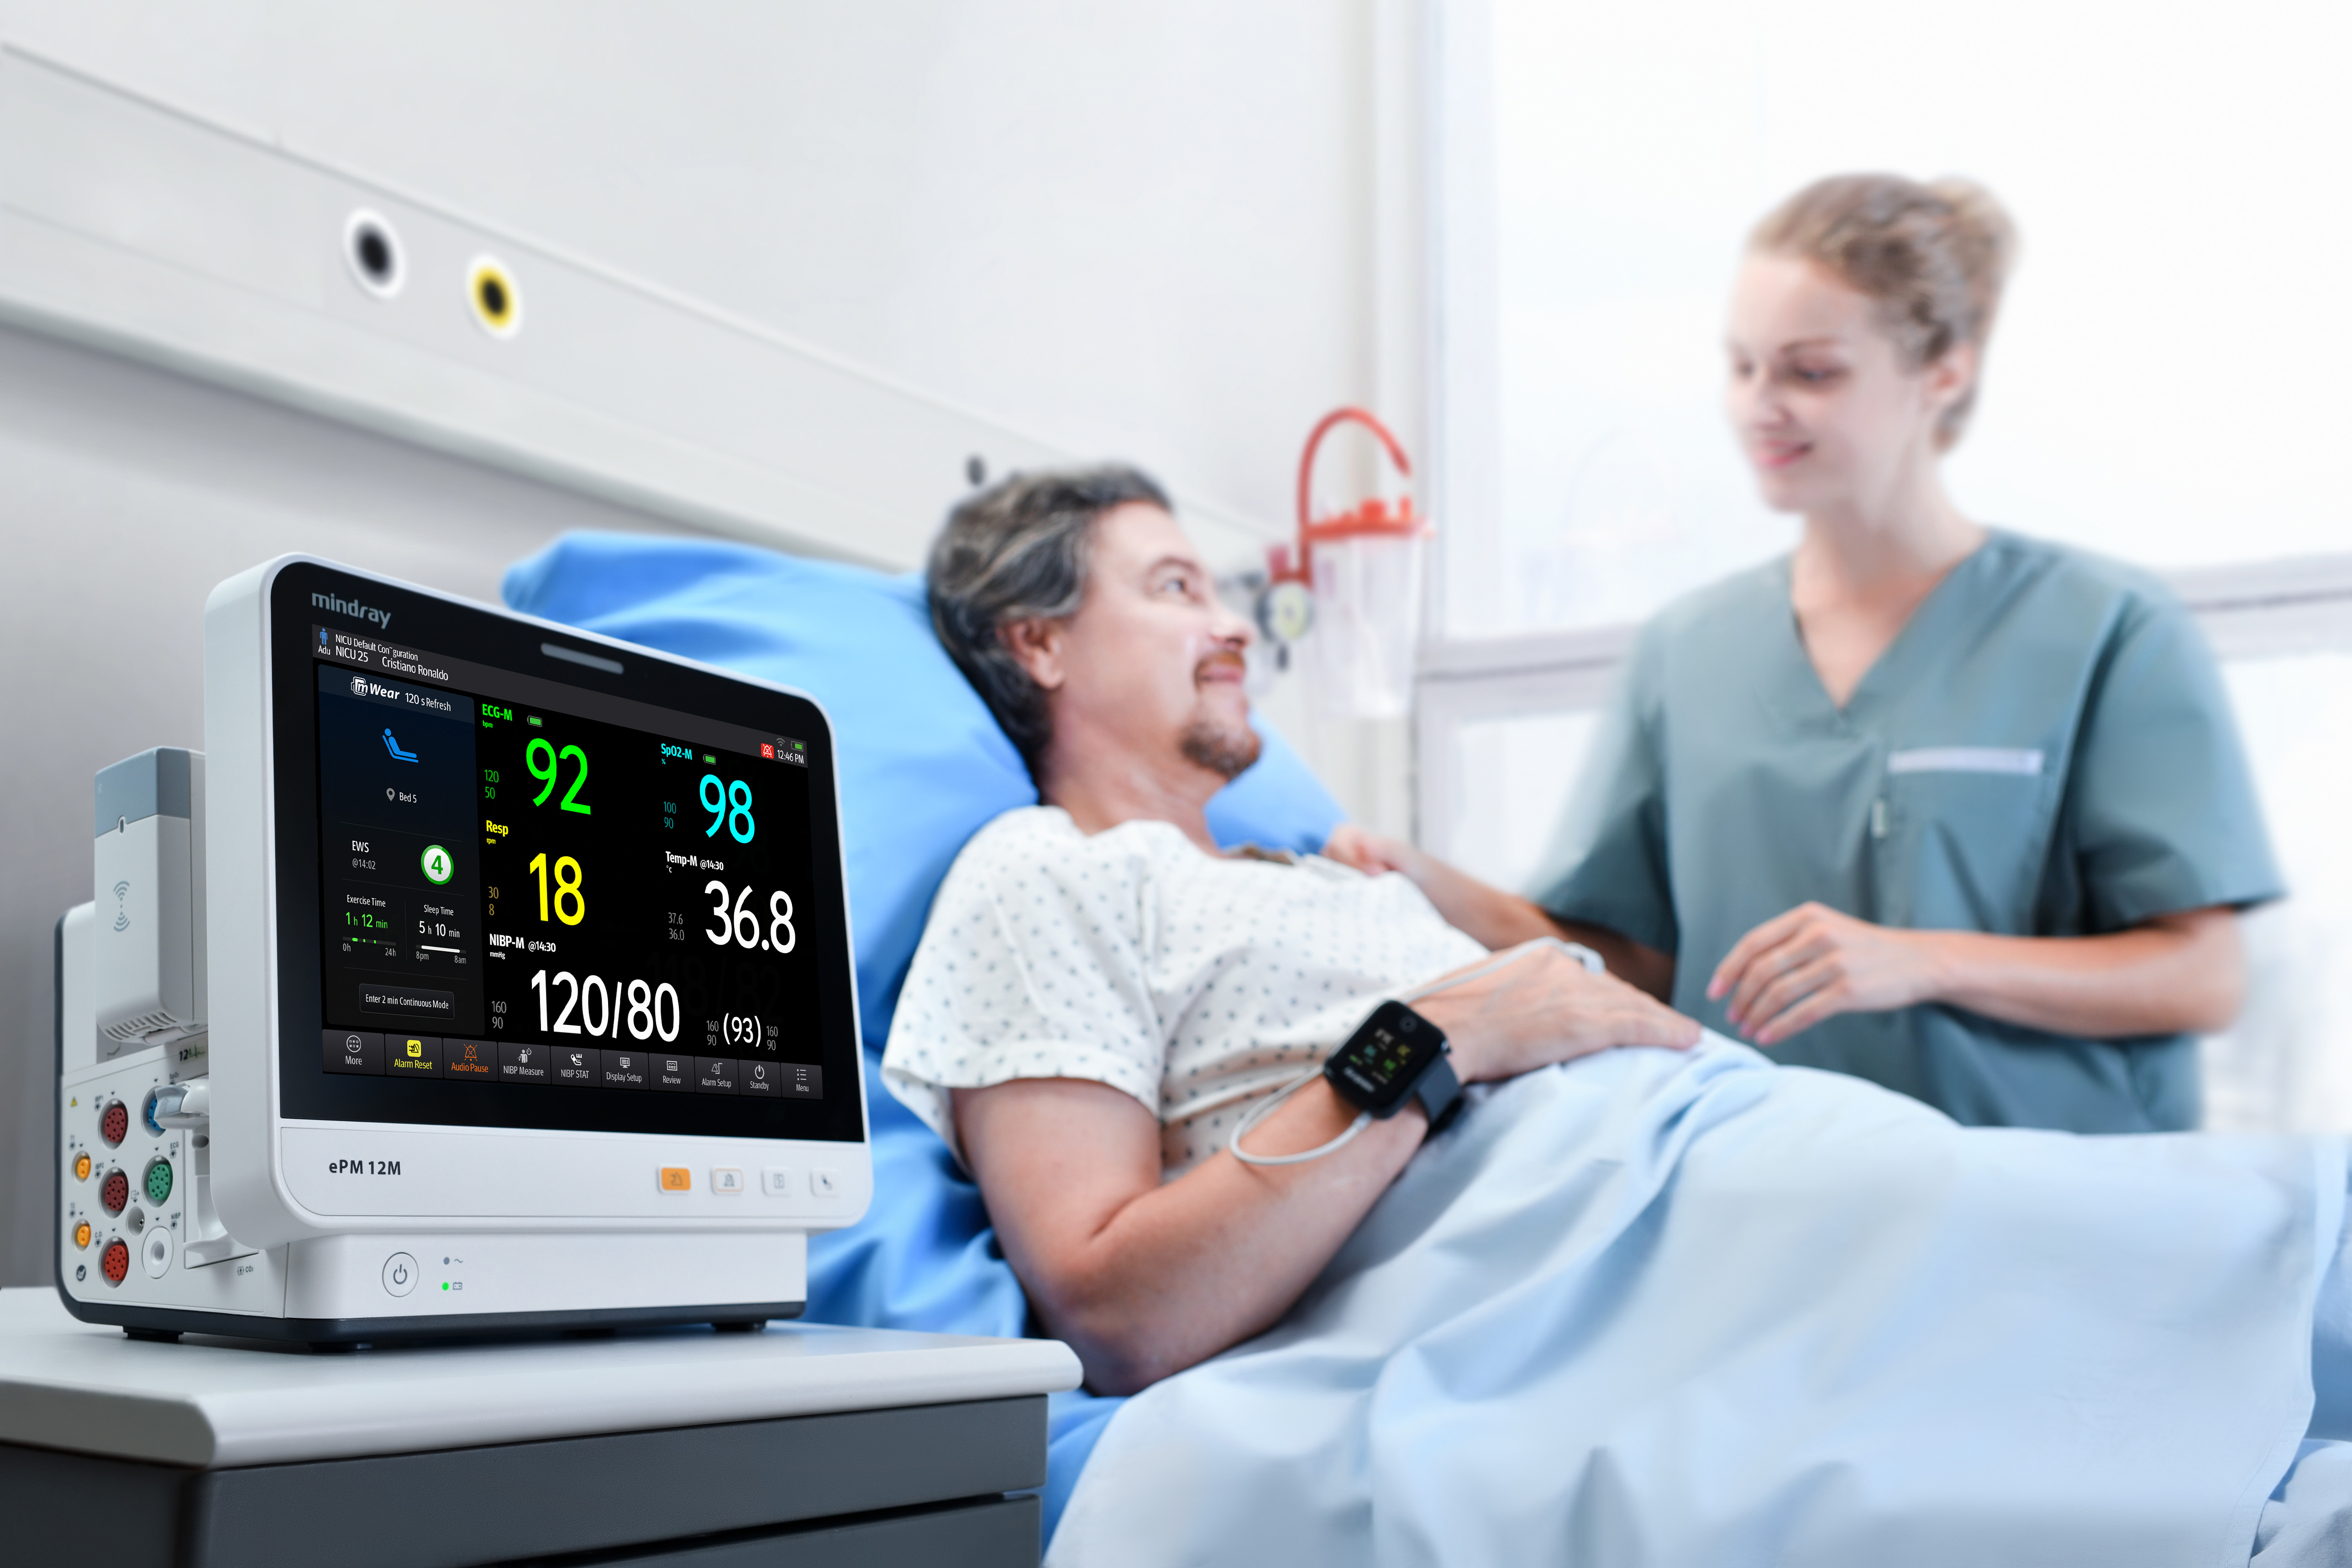 mWear wearable patient monitoring system